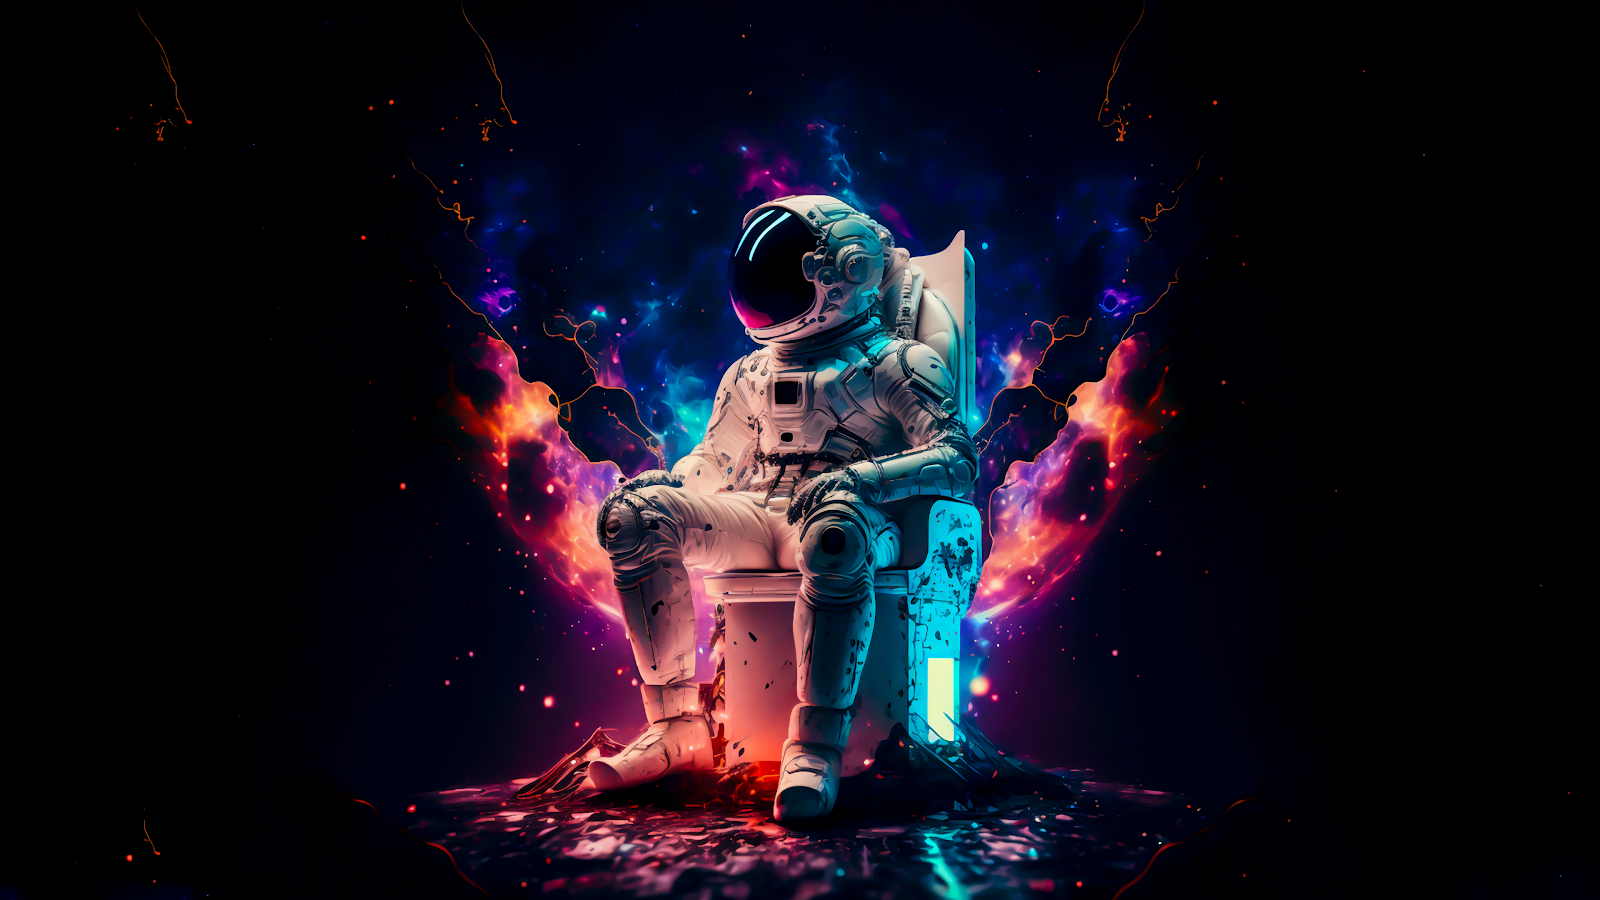 Experience the tranquility of space with this Astronaut 4K background  wallpaper for PC